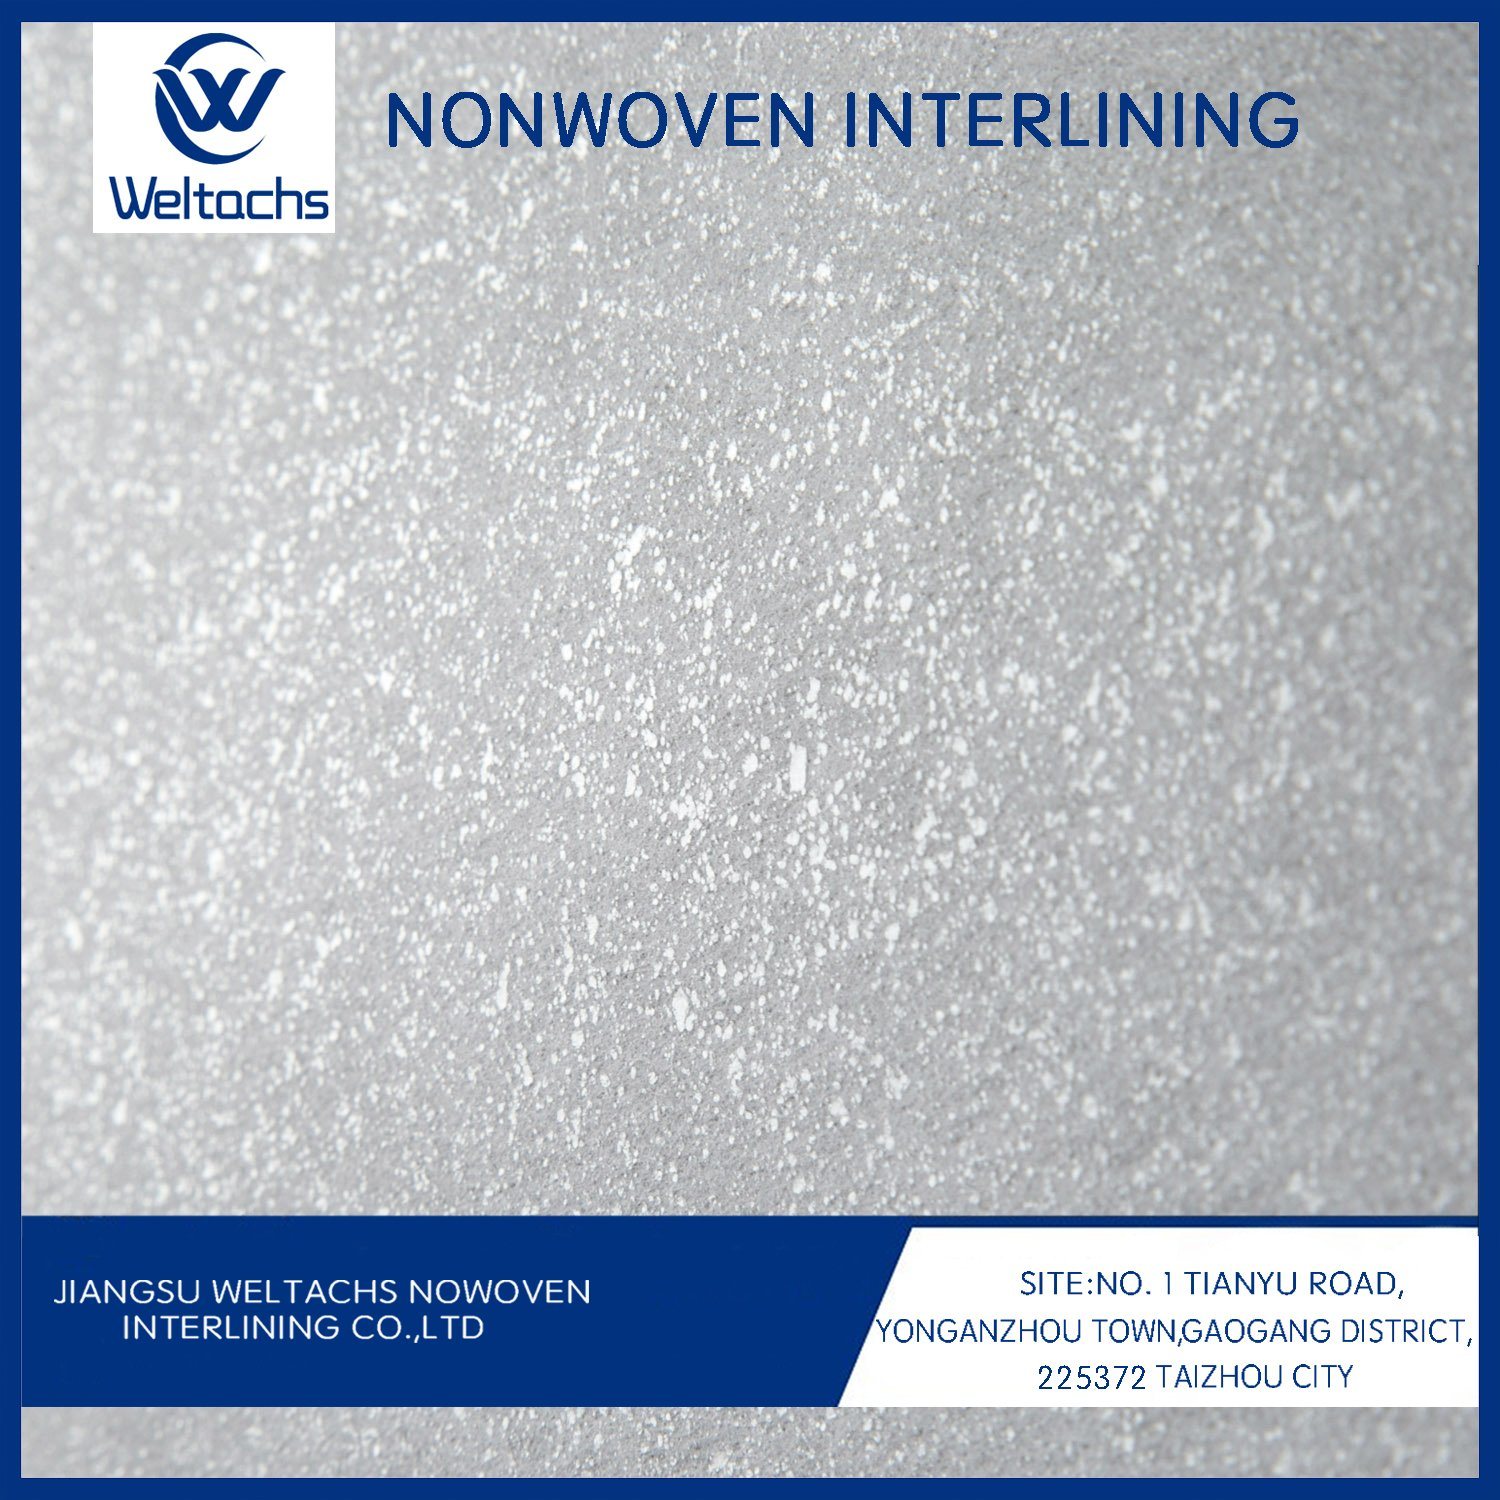 1080hb 100% Polyester Hard Hand Feel Cut Away Non Woven Interlining for Embroidery Backing